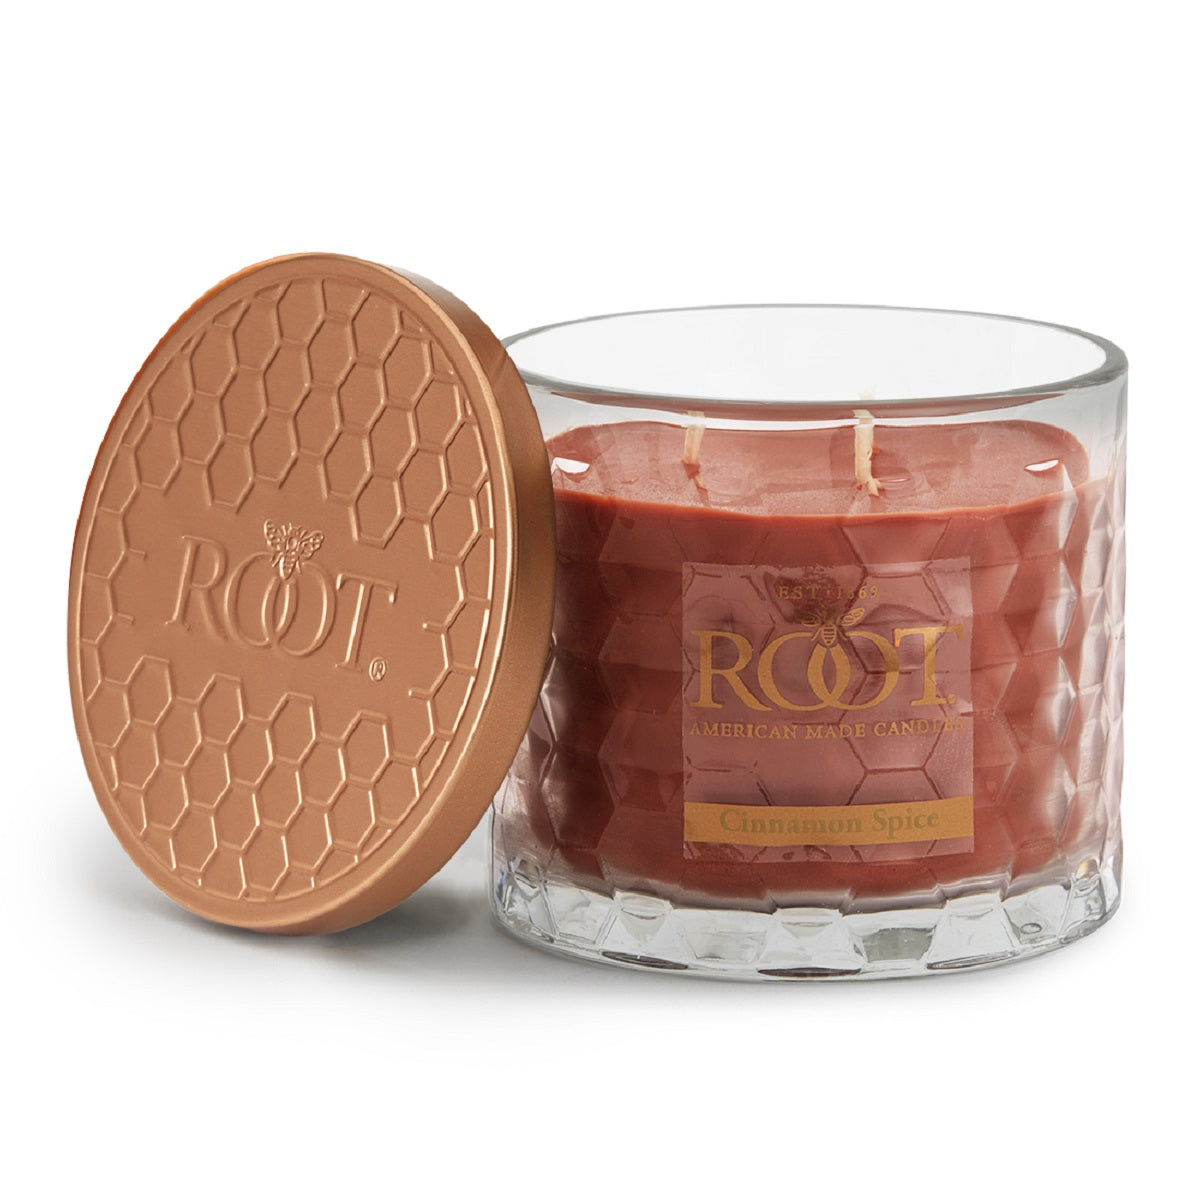 Cinnamon Spice Honeycomb 3-Wick Root Cande